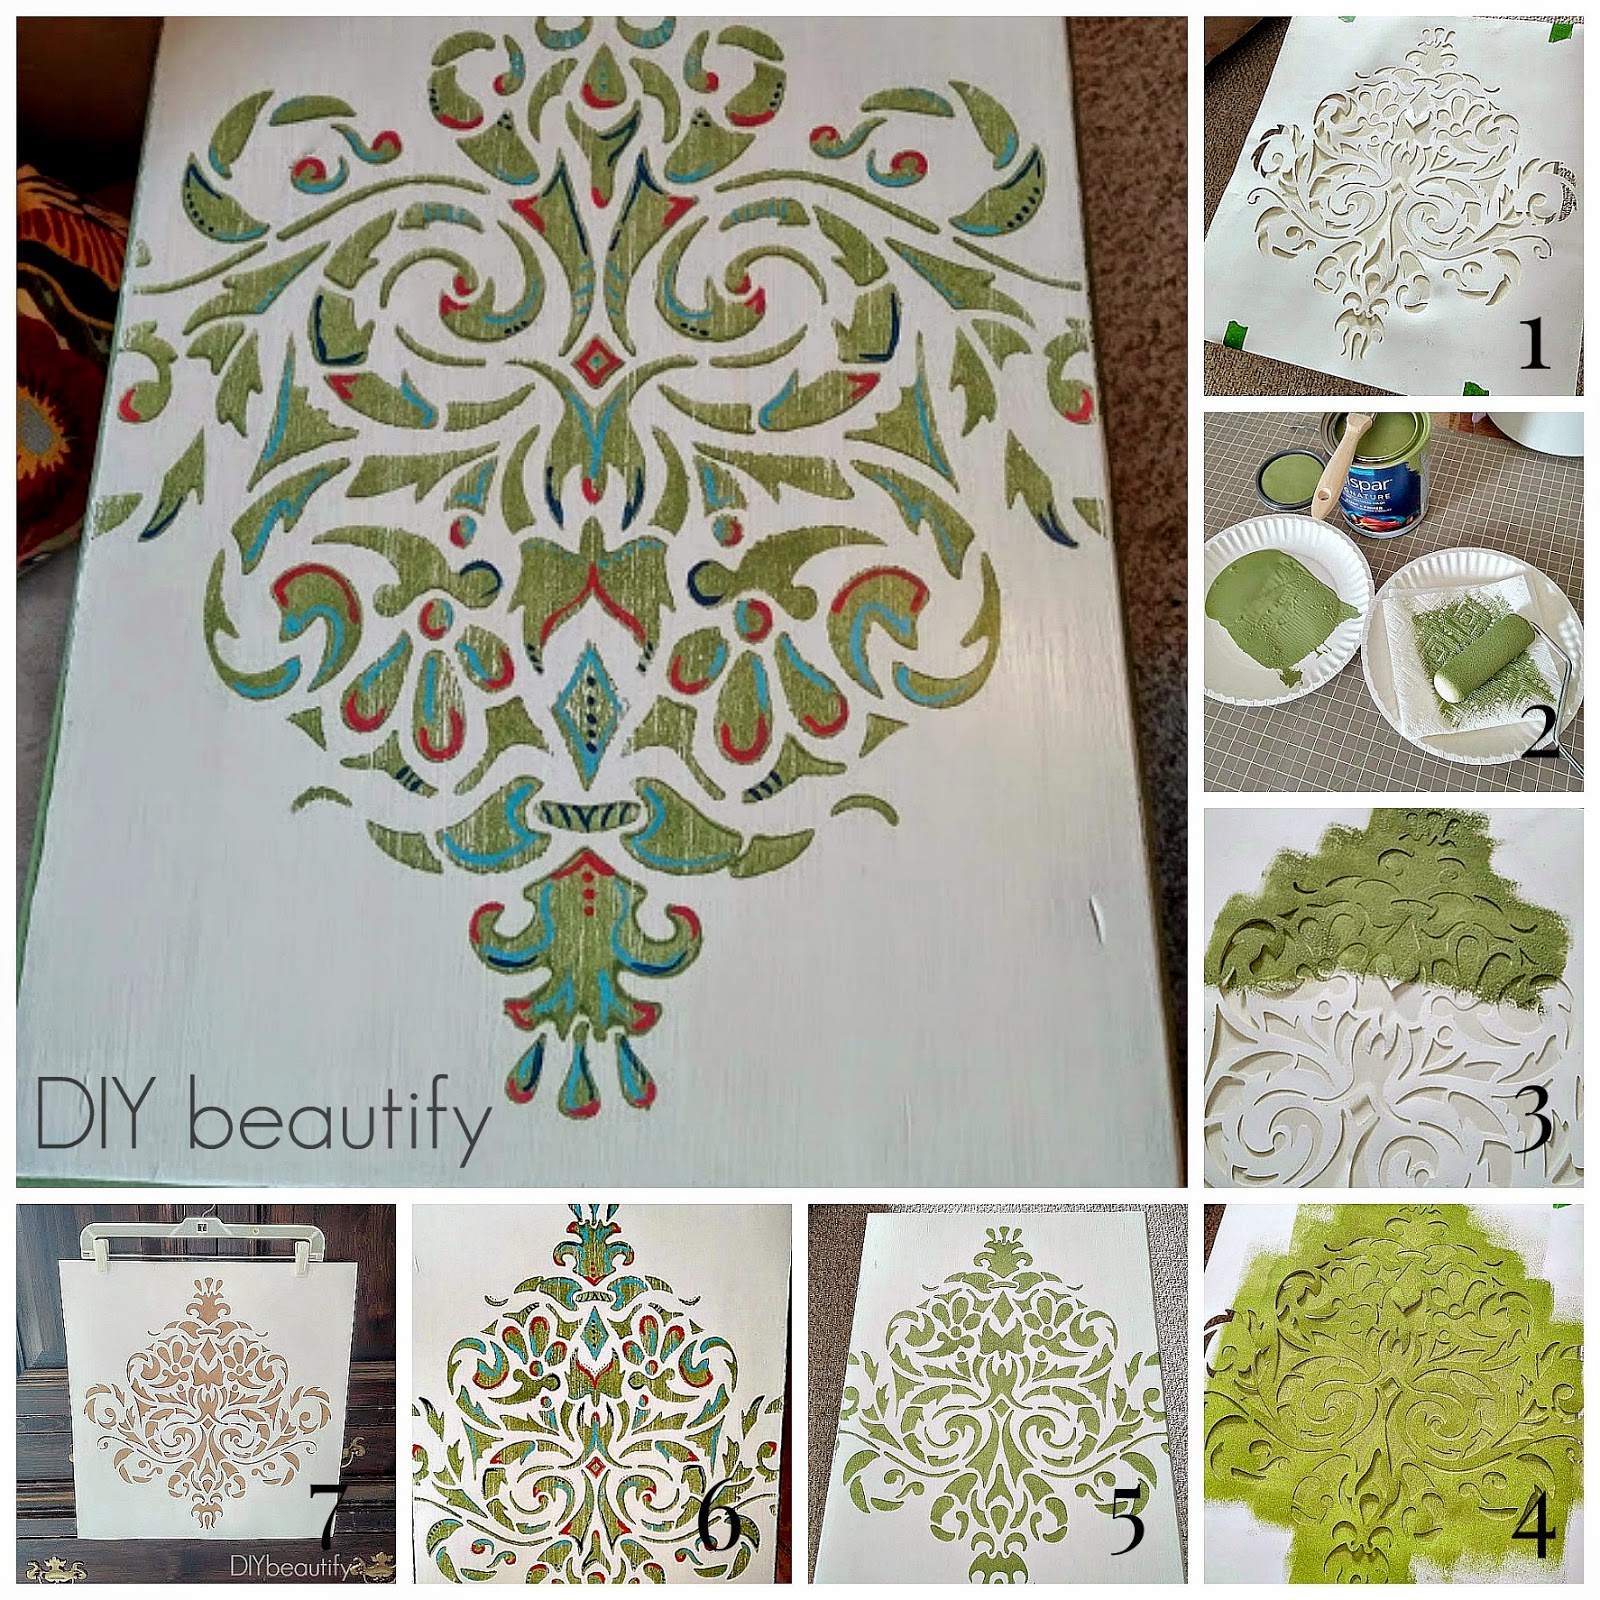 This stencil makeover only looks complicated! C'mon over to DIY beautify and see how I created this Moroccan-like pattern with just paint and a stencil.